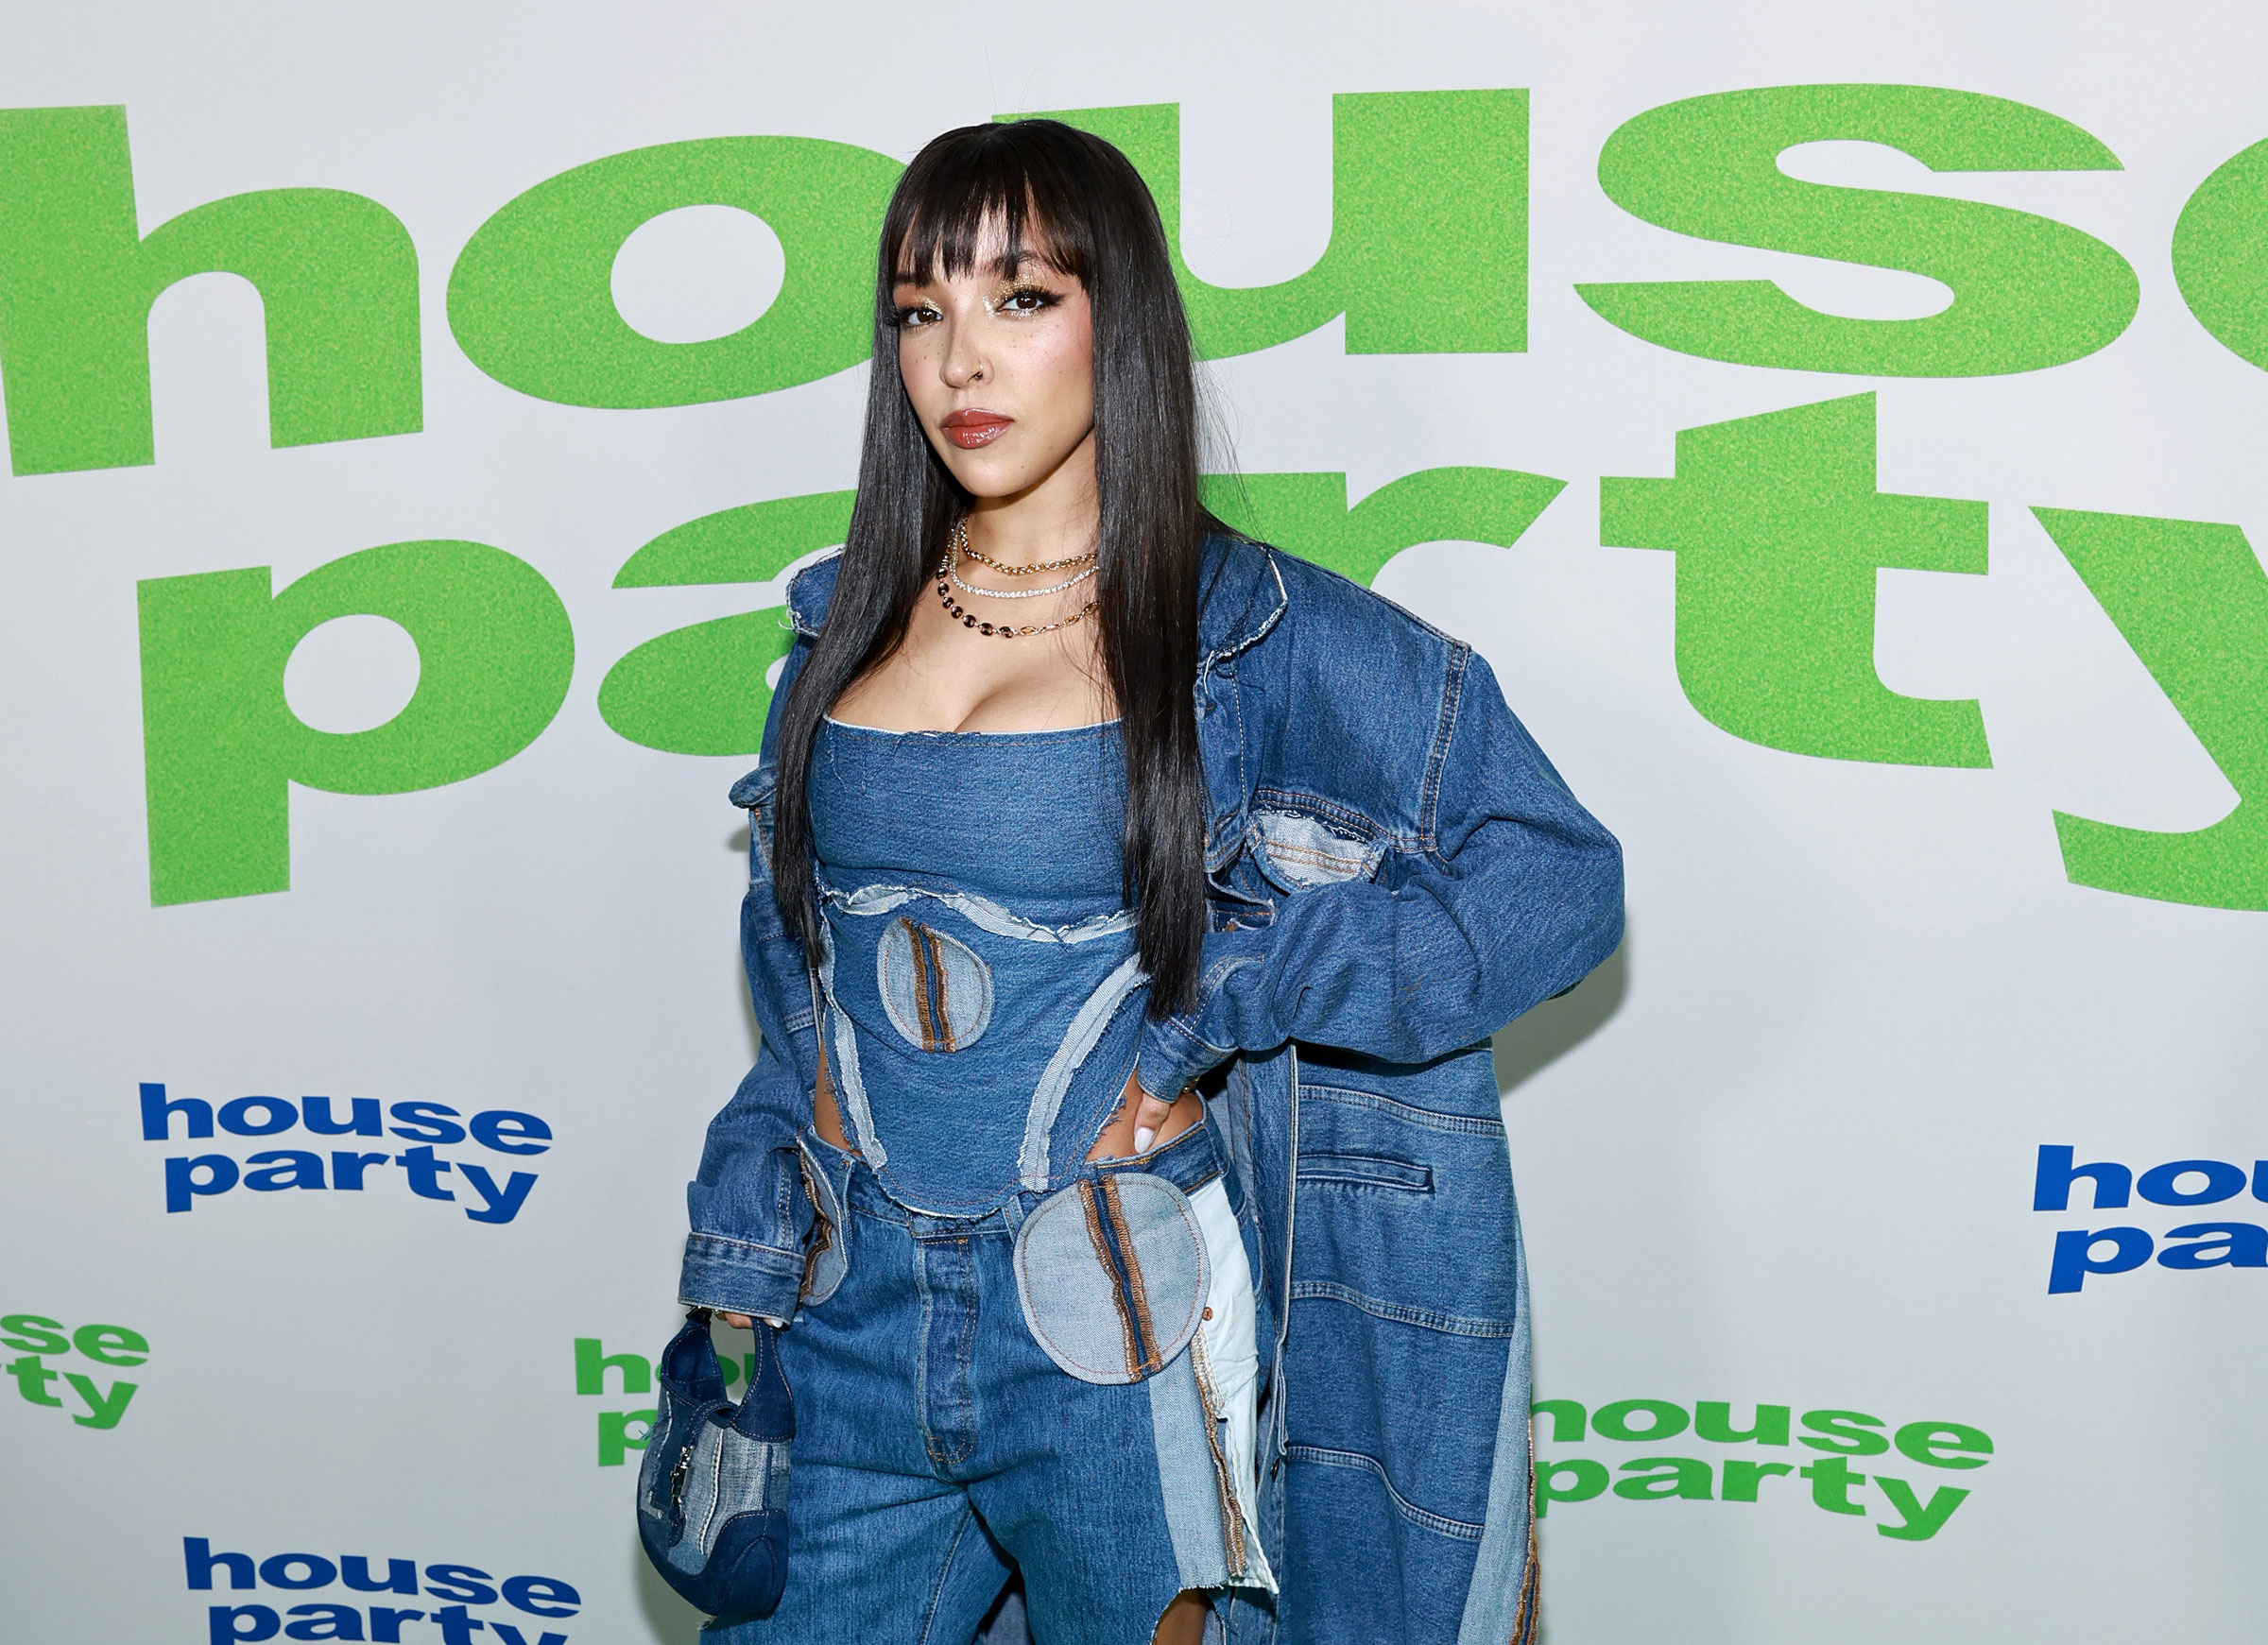 Tinashe attends the Special Red Carpet Screening for New Line Cinema’s “House Party” at TCL Chinese 6 Theatres in Hollywood, Calif., on Jan. 11, 2023.